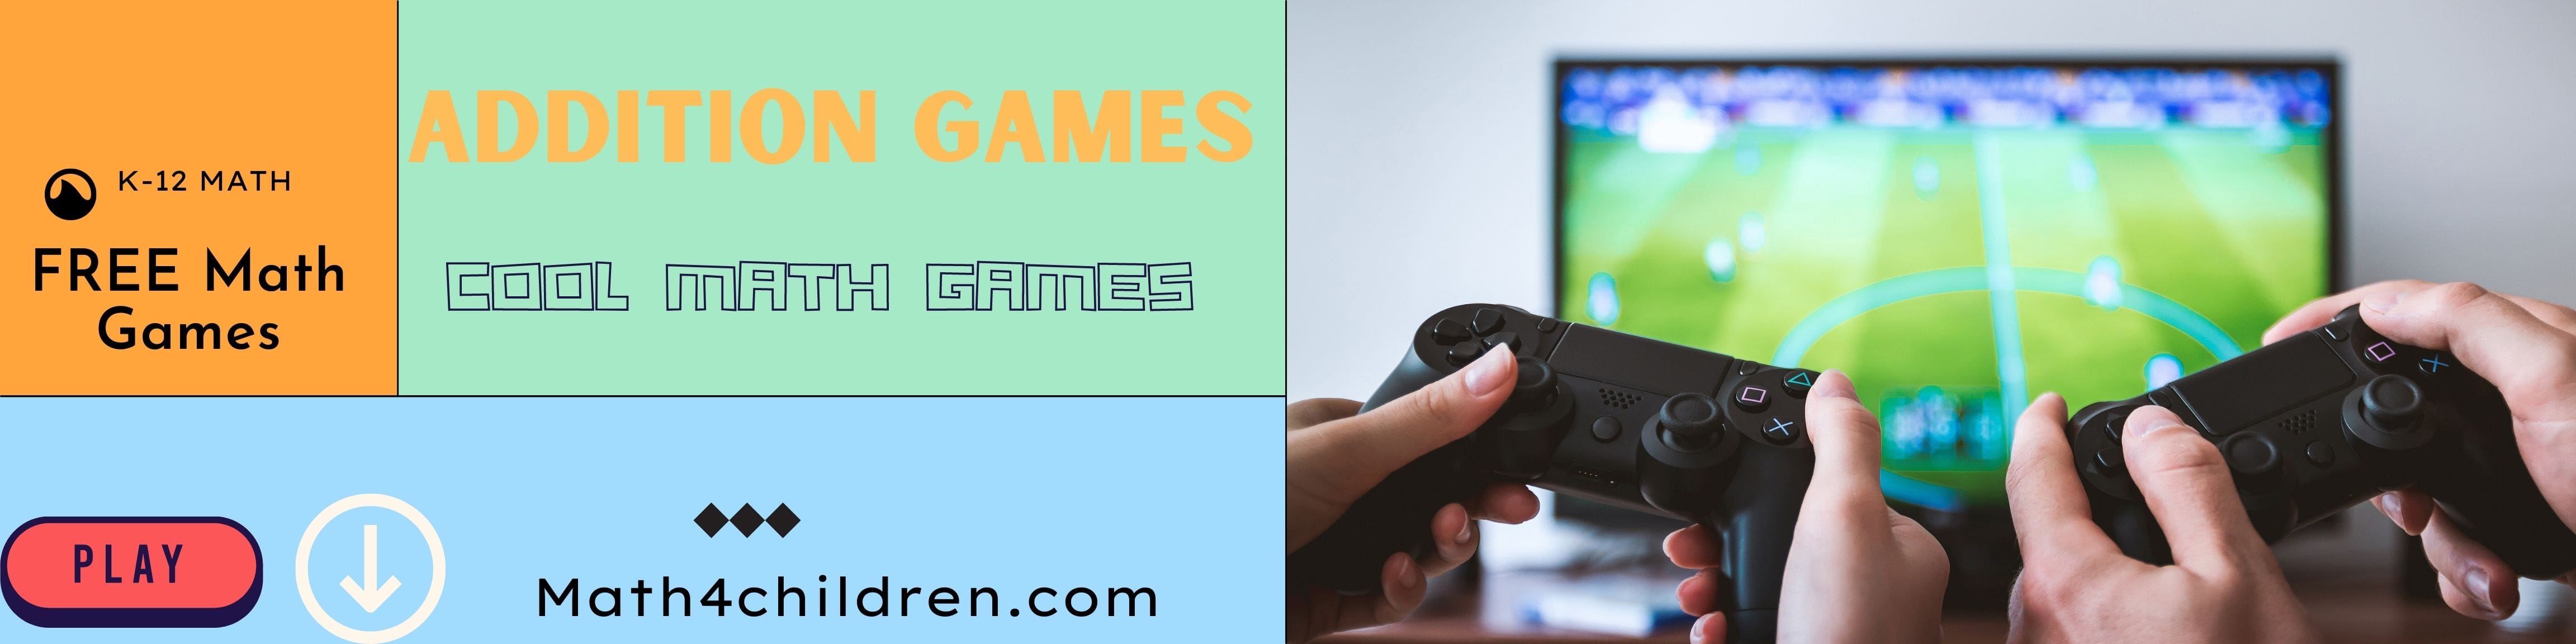 Addition Games Online - Free addition games for kids in k-12